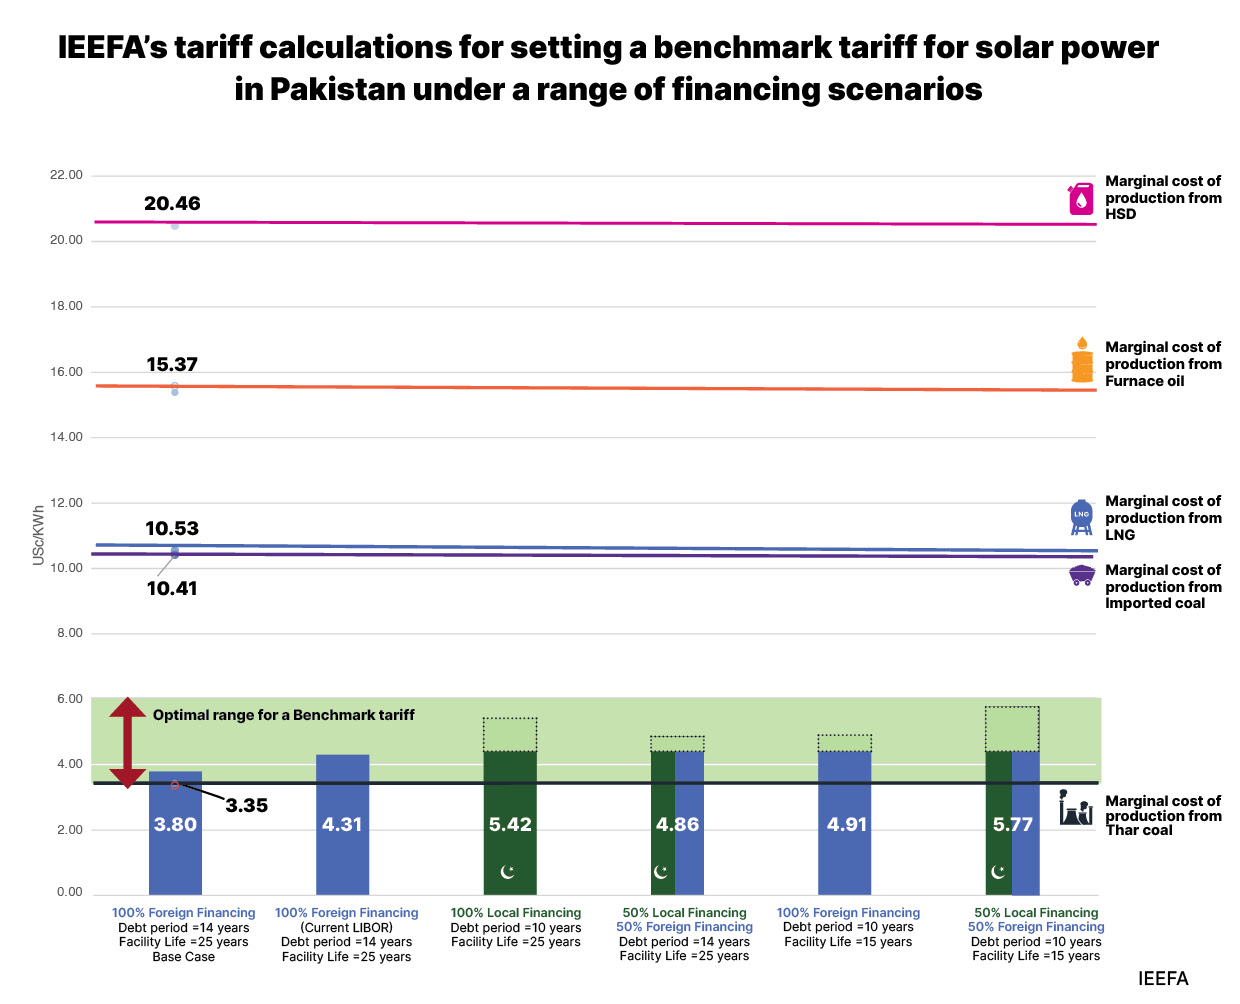 IEEFA’s Tariff Calculations - IEEFA: Boosting Pakistan’s Renewable Investments Through Auctions Would Require an Enhanced Benchmark Tariff and Financial Guarantees 